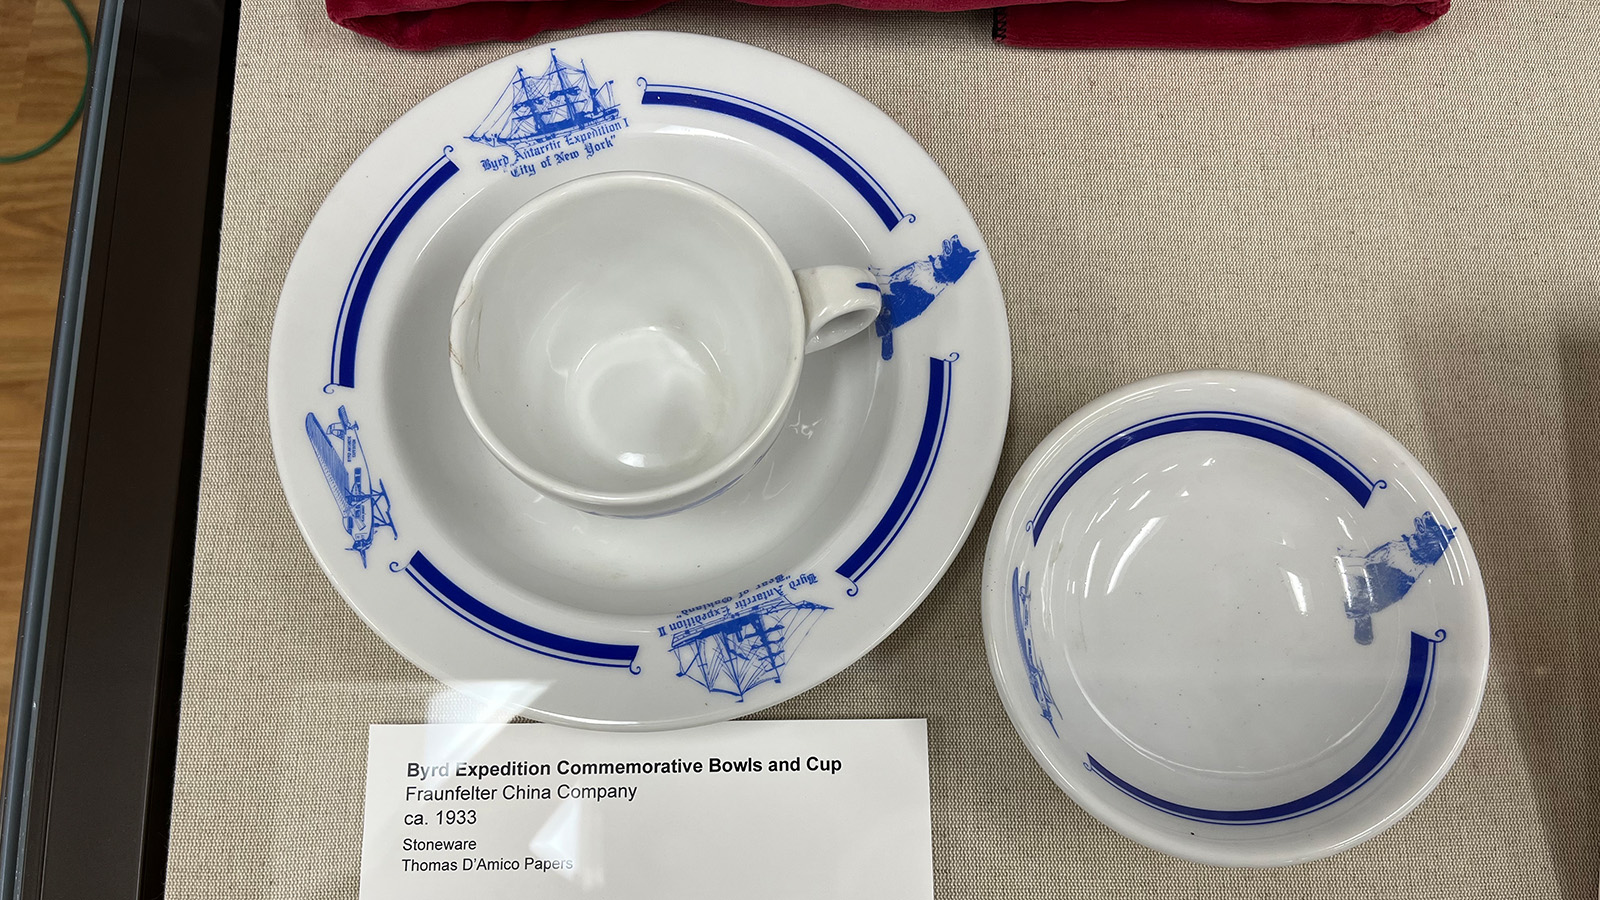 Byrd Expedition Commemorative Bowls and Cup